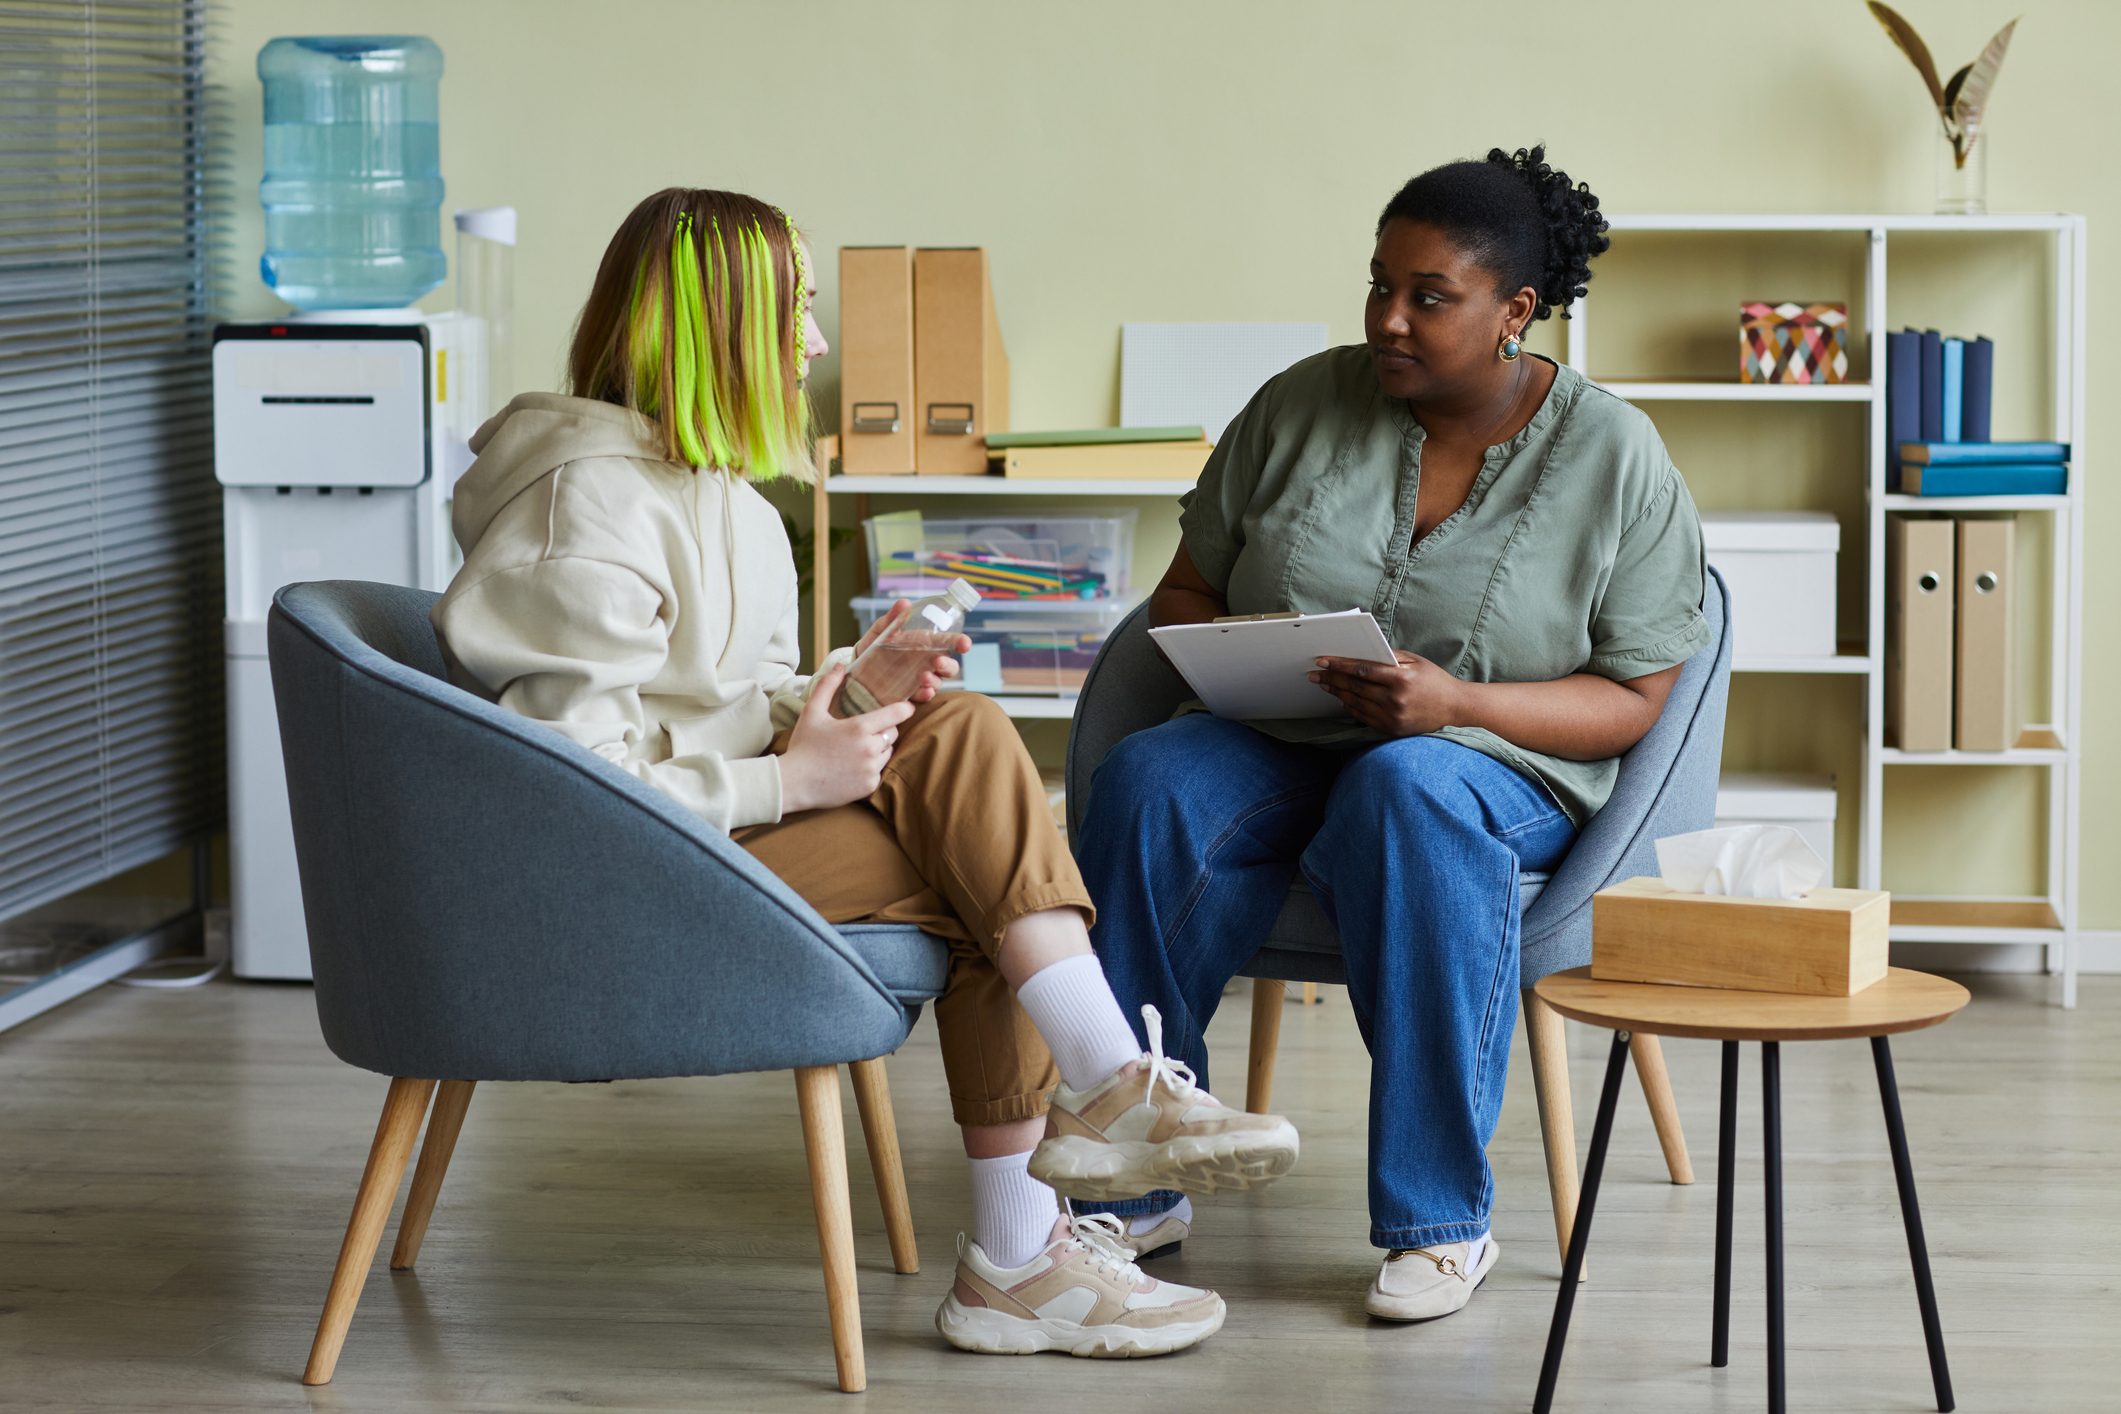 A Black, female psychologist sitting in a nicely decorated office starting treatment for an anxious teenage girl with bright green extensions in her hair